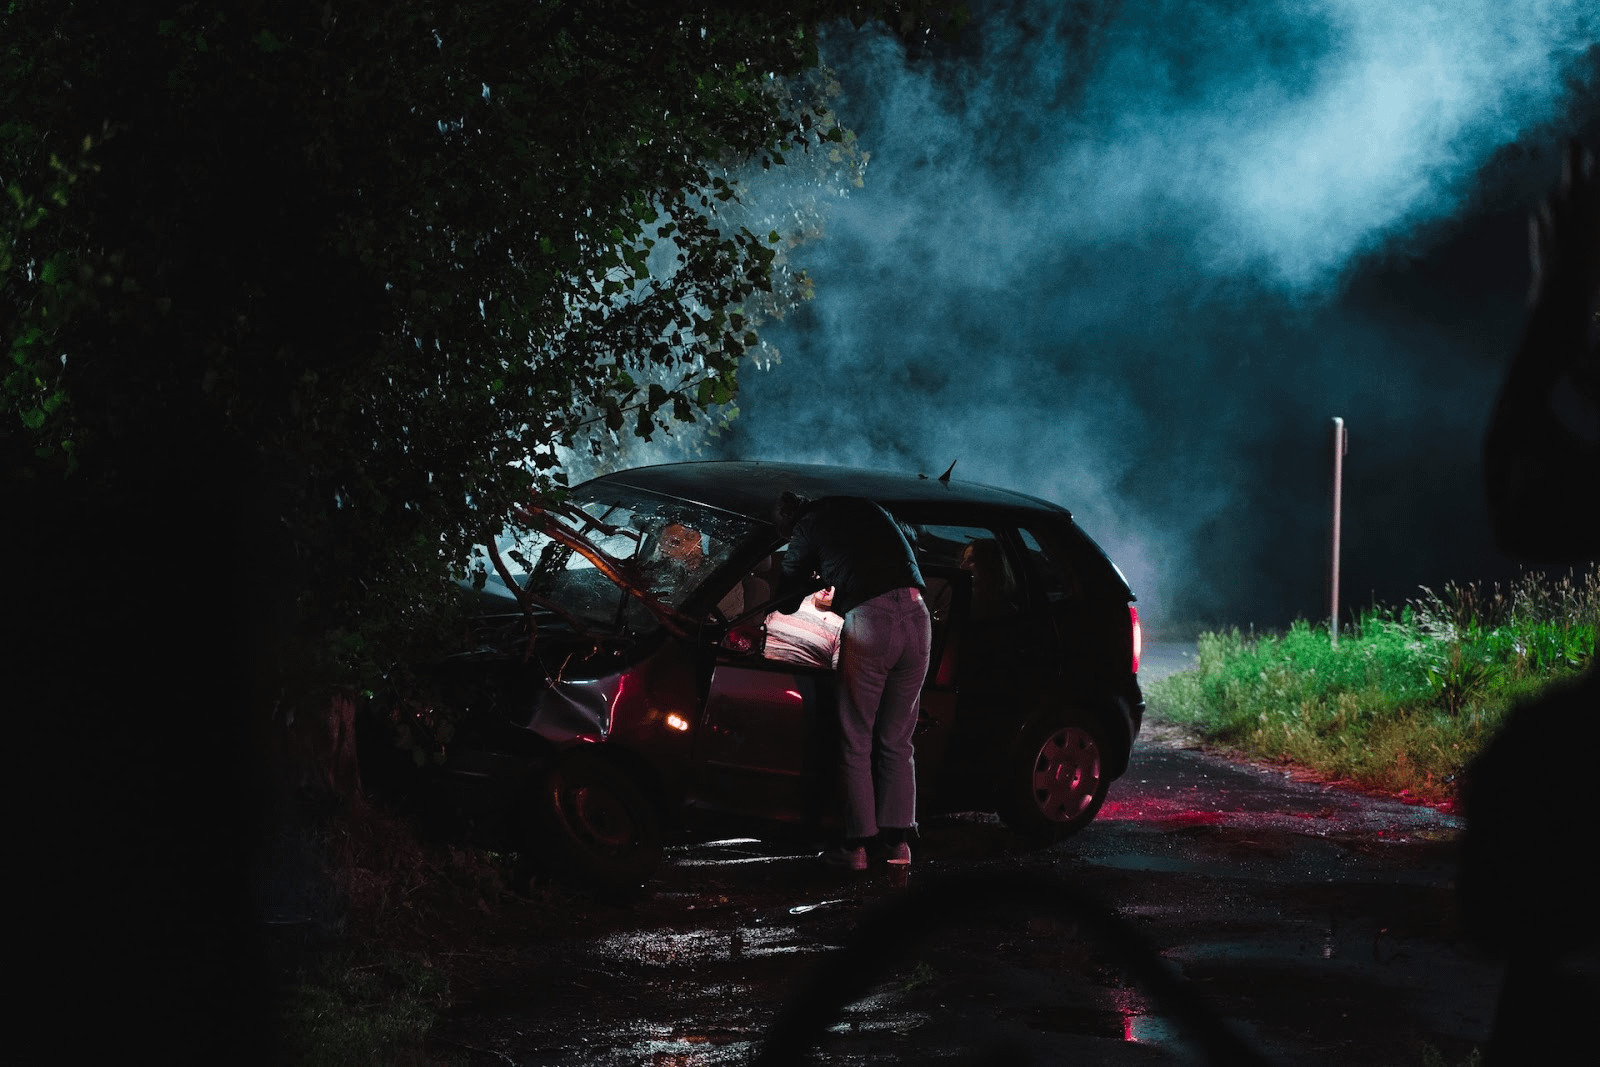 A car in a hedge at night